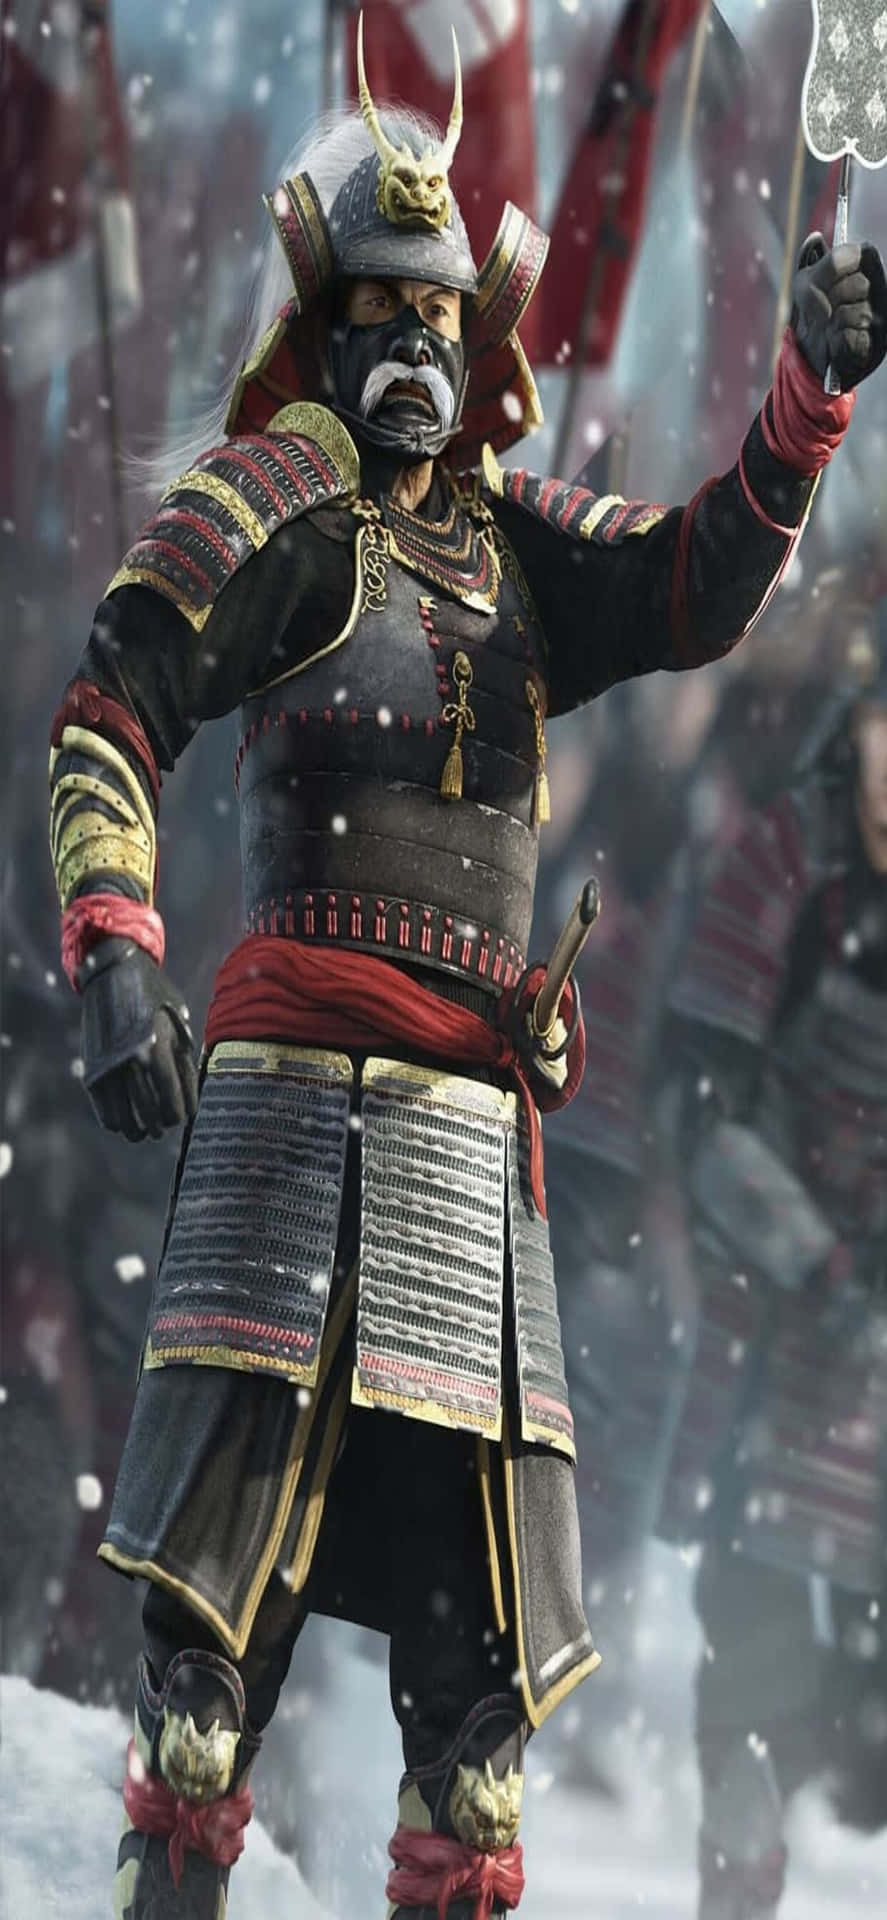 Ready to take control of your destiny in Total War Shogun 2?